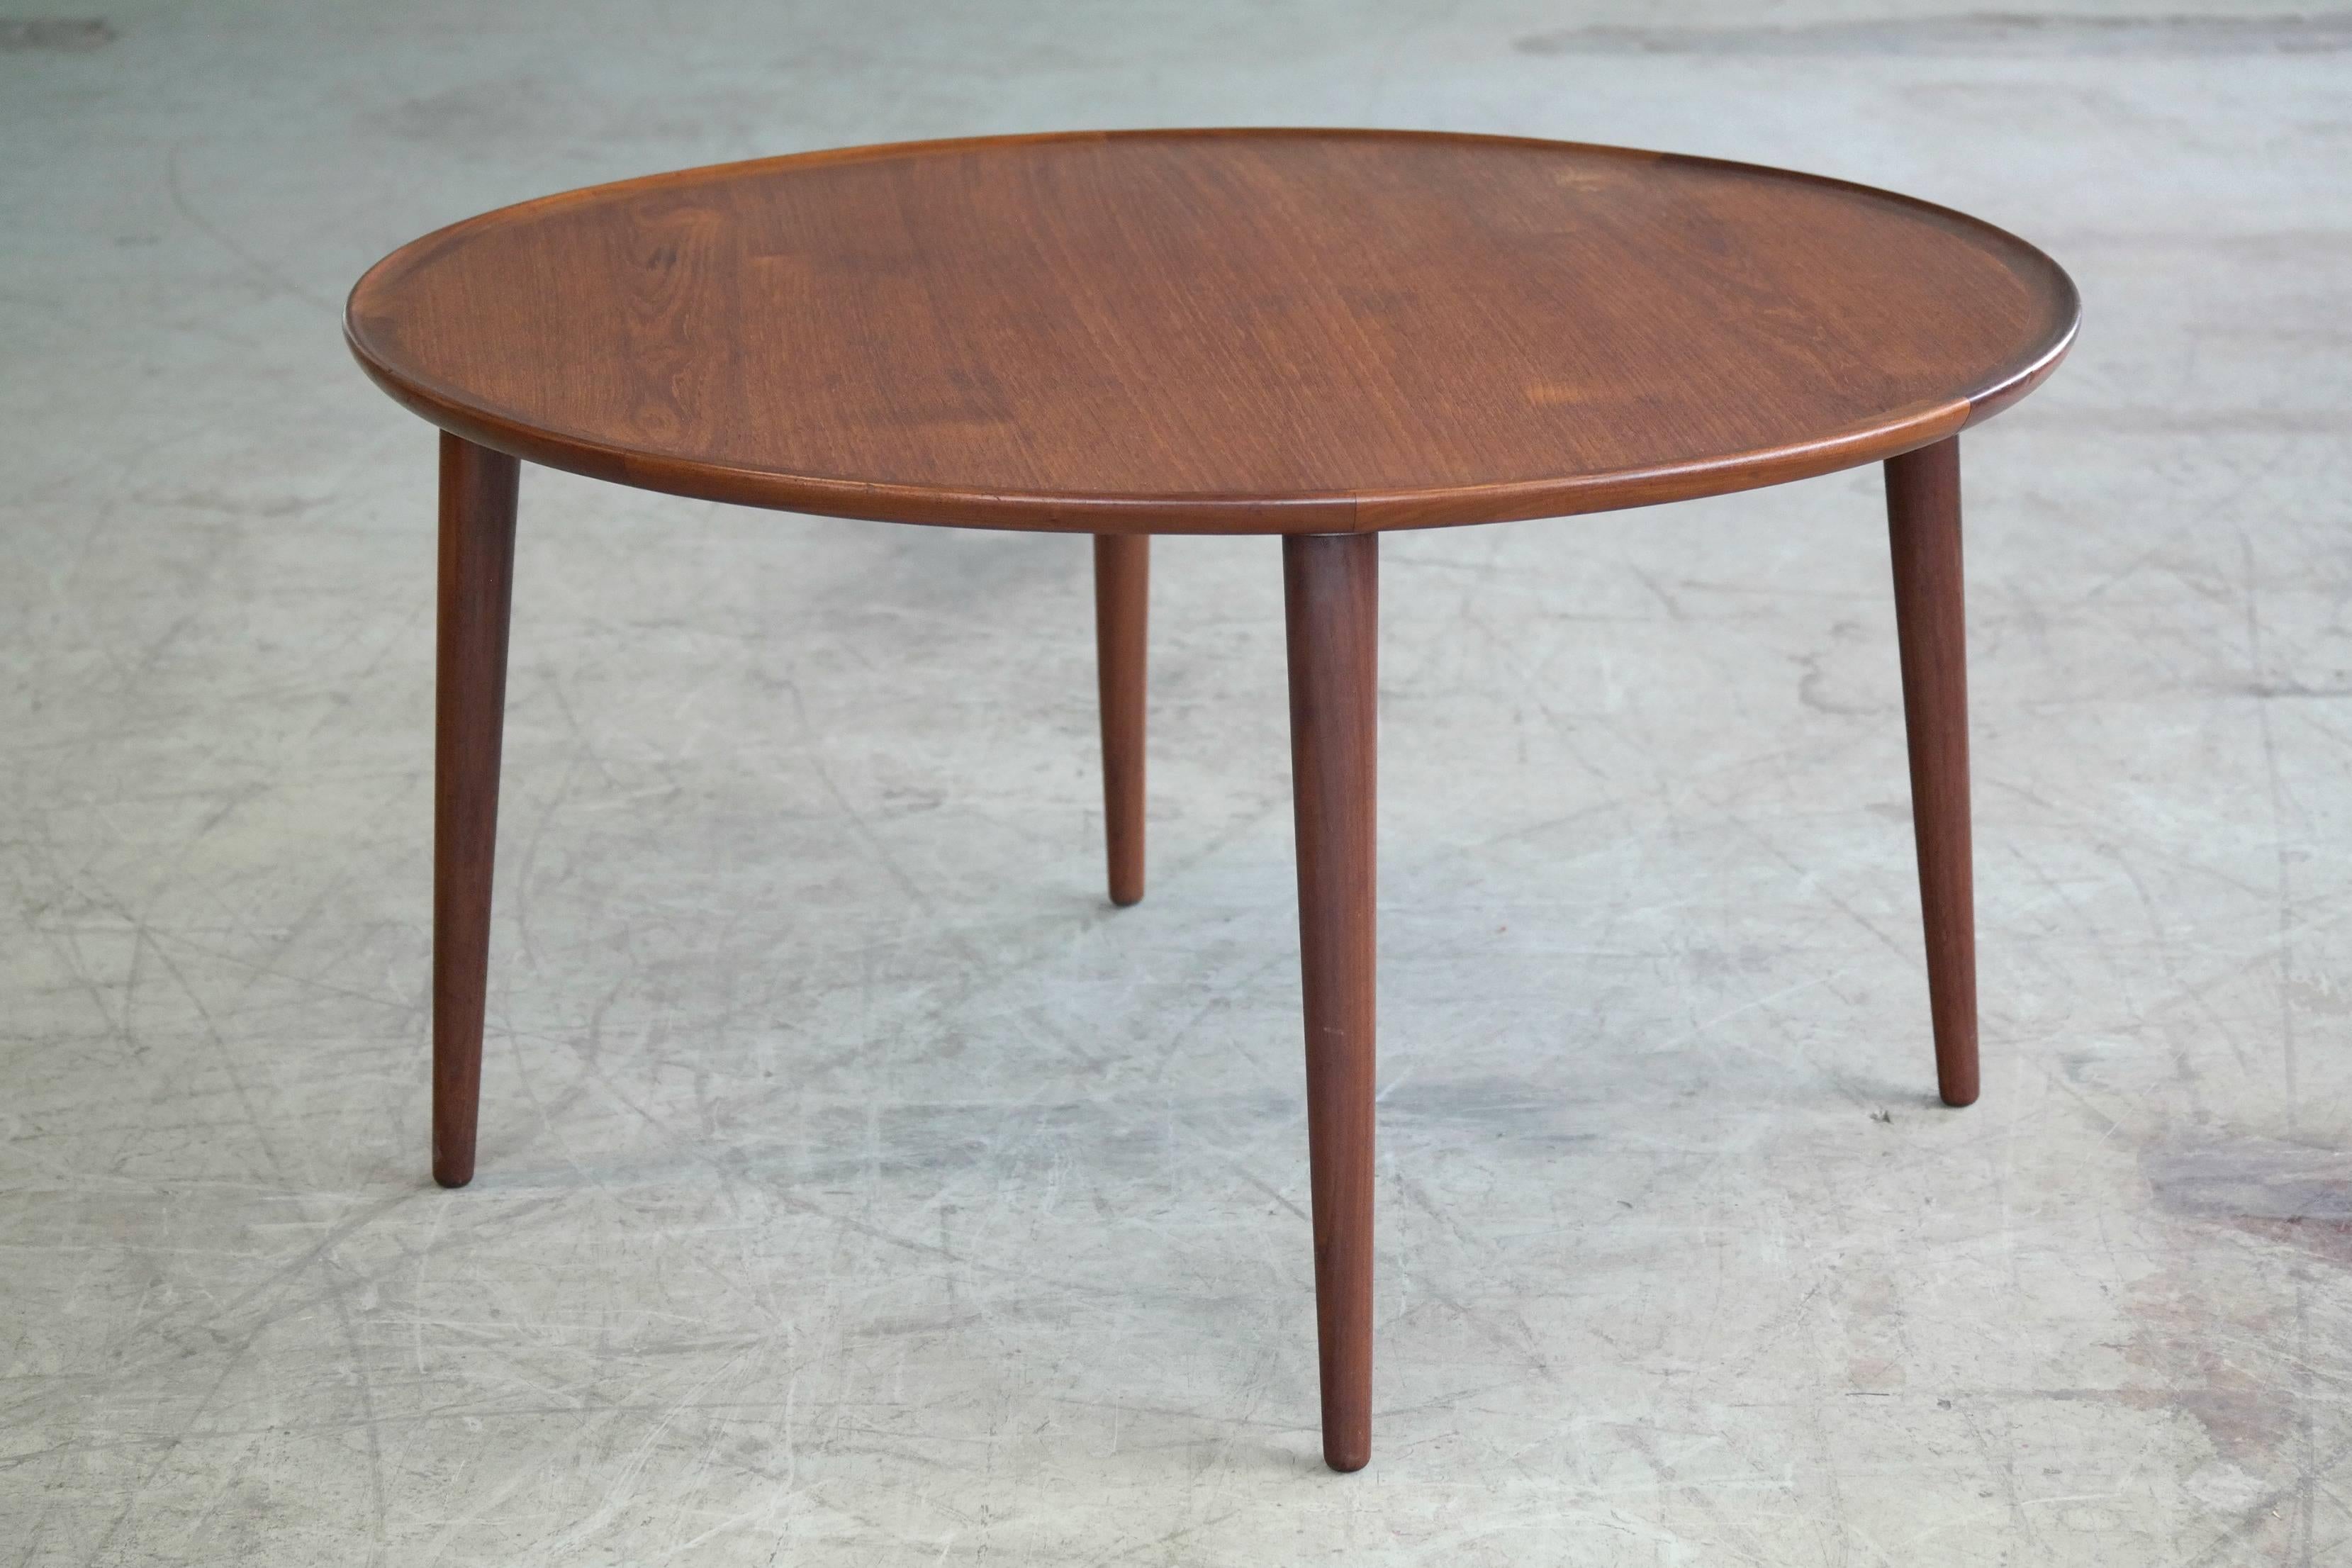 Beautiful teak coffee table by Peter Hvidt. Round top with nice solid teak lip resting on four tapered solid teak splayed legs. Pure elegance and overall excellent condition.